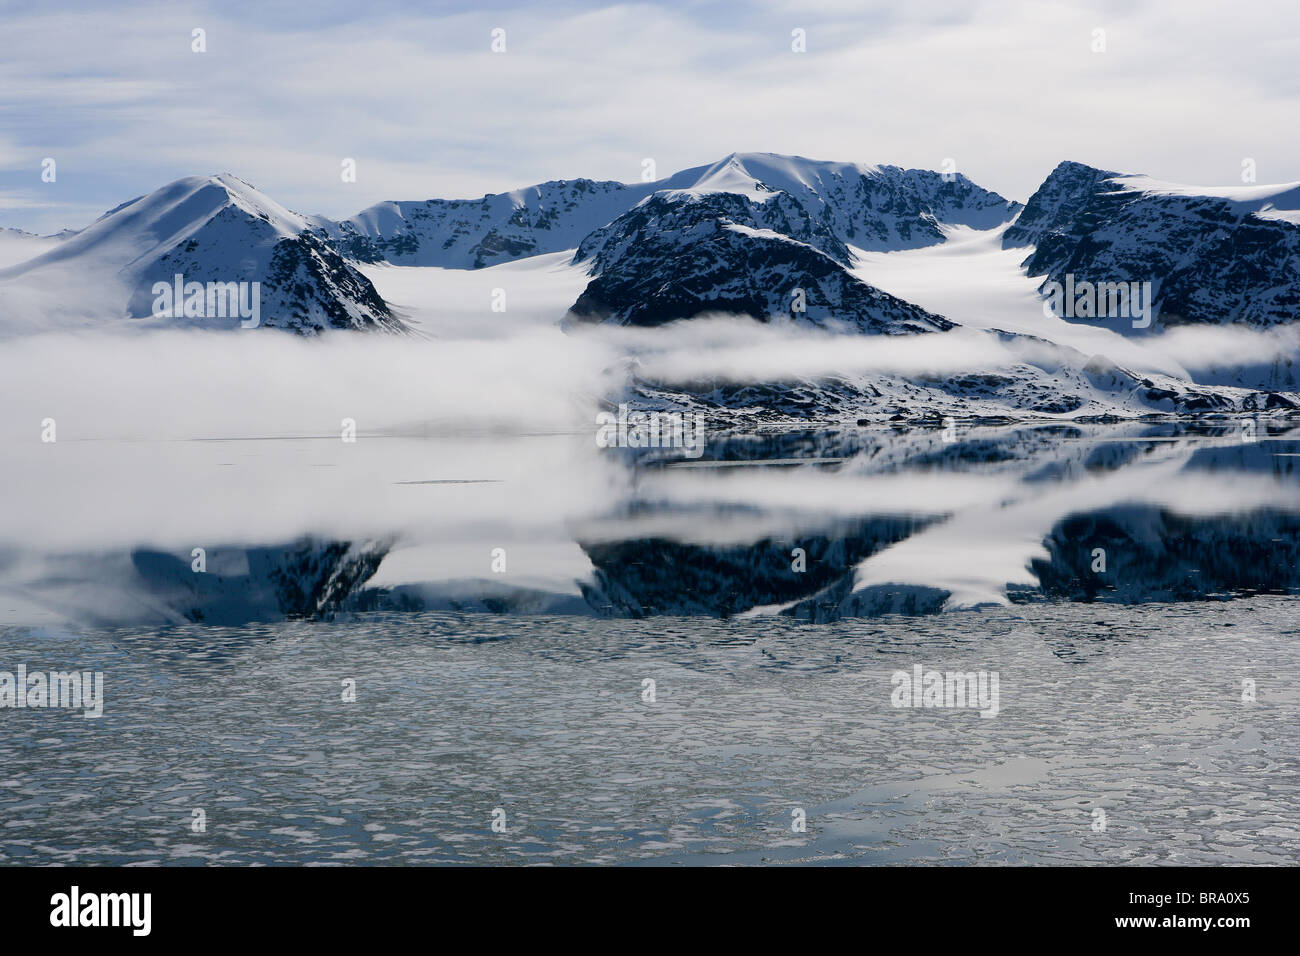 Snowy Mountains, Cloud and Crisp Reflections with Sea Ice, Liefdefjord, Svalbard, Arctic Norway Stock Photo